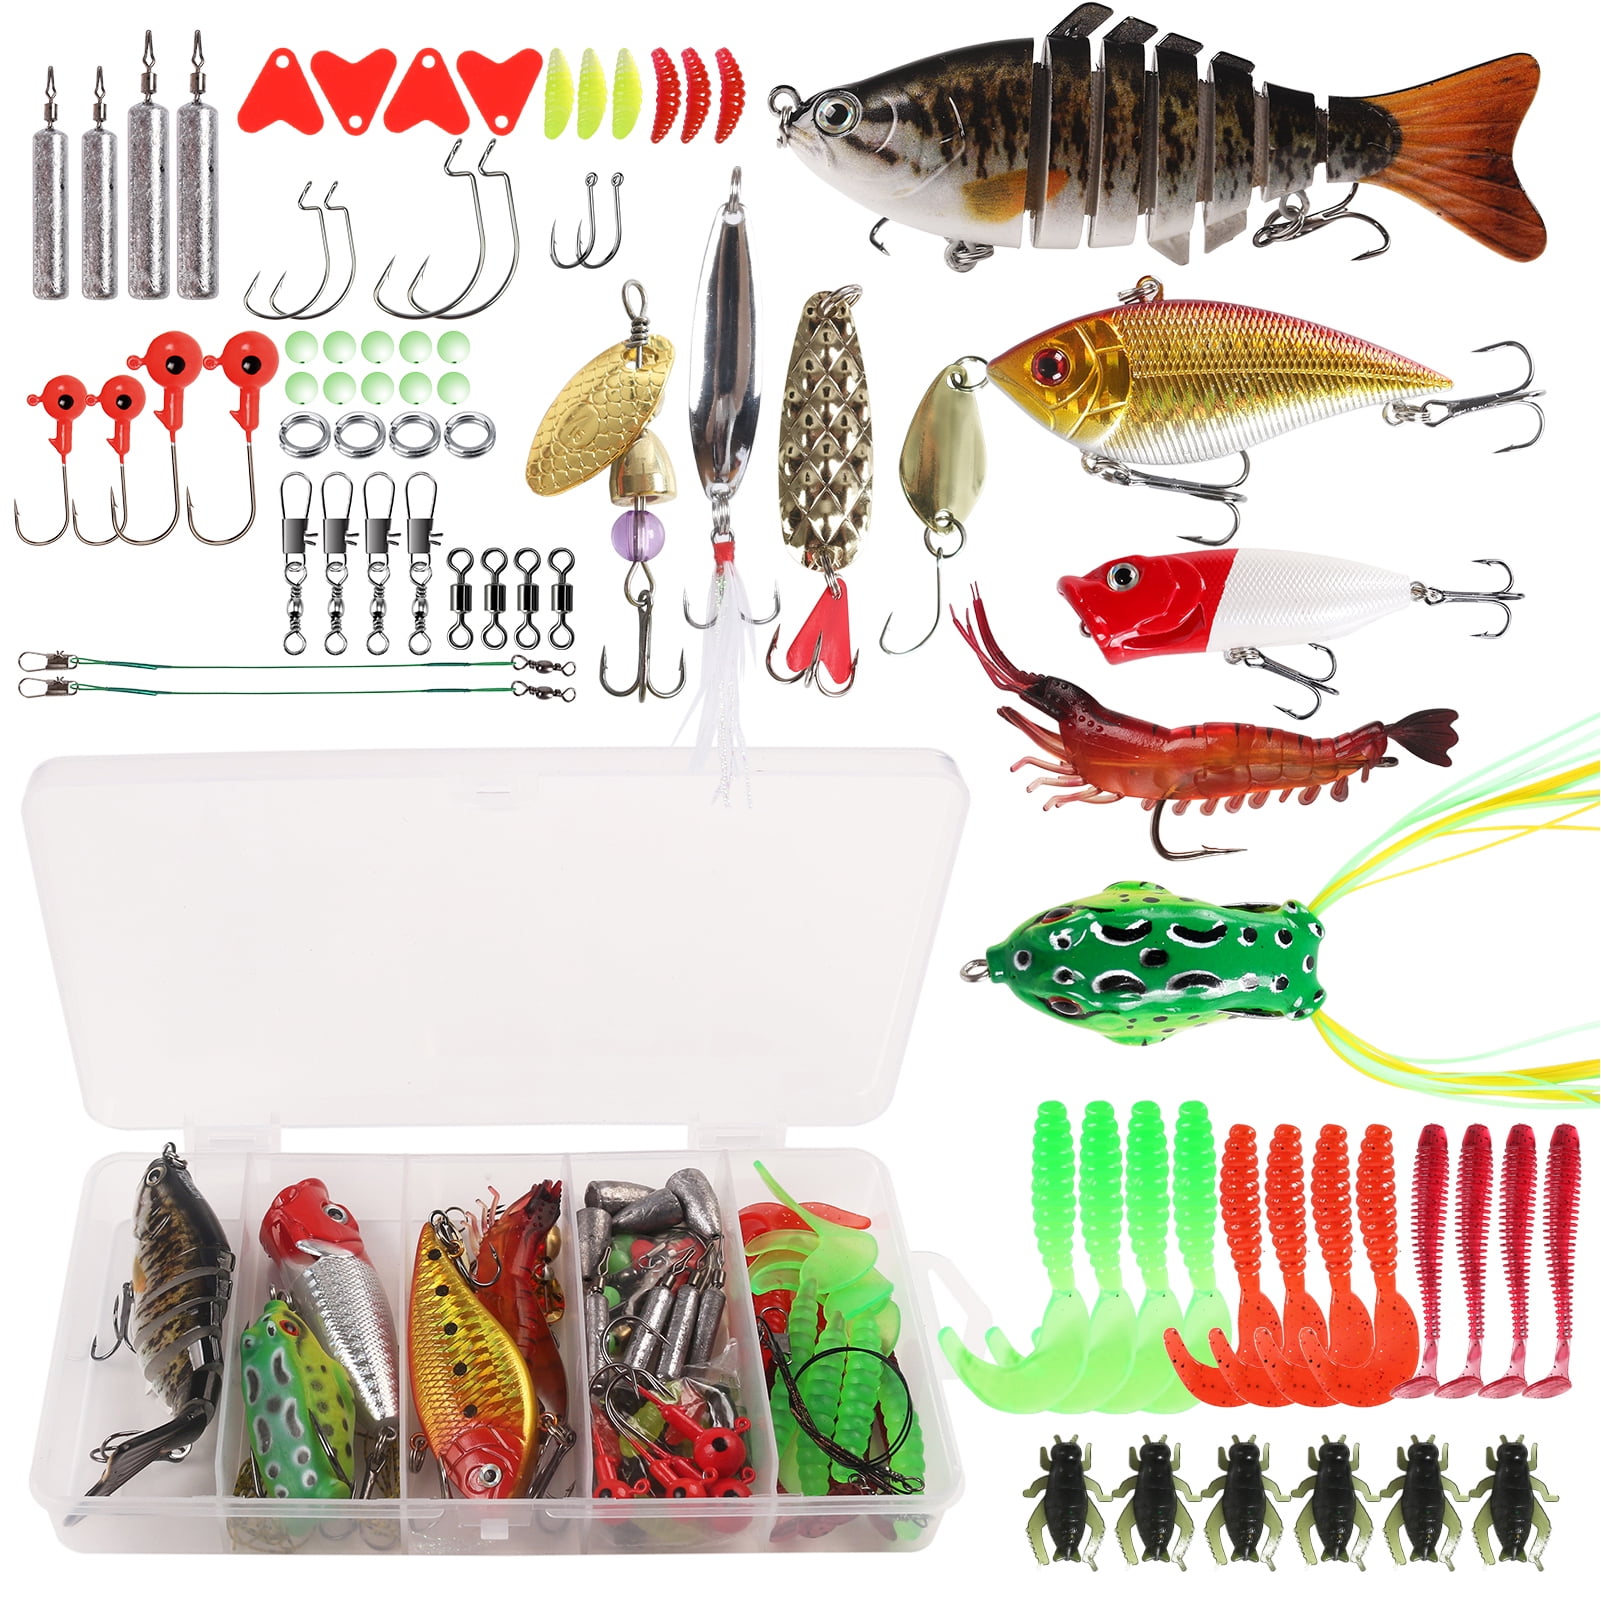 138pcs Fishing Accessories Set with Tackle Box Including Offset